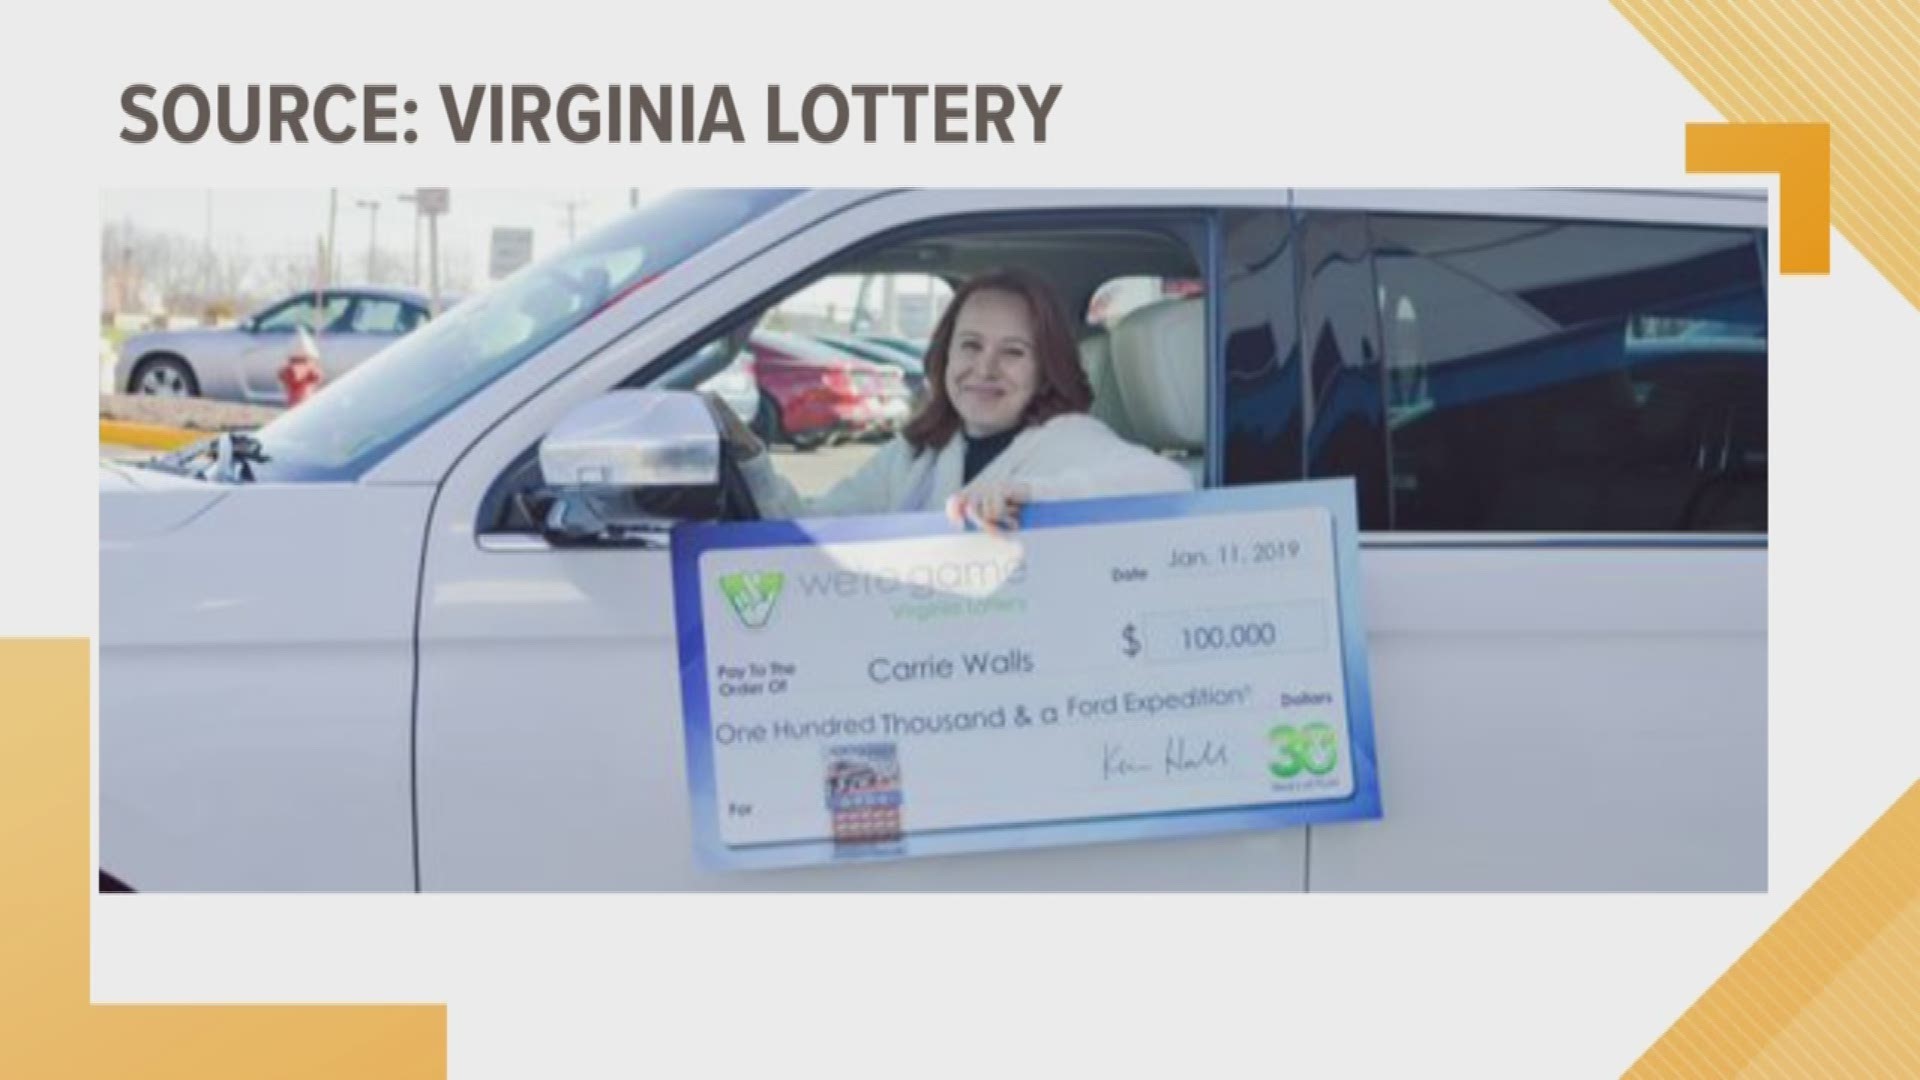 A family in Virginia impacted by the government shut down won the lottery!